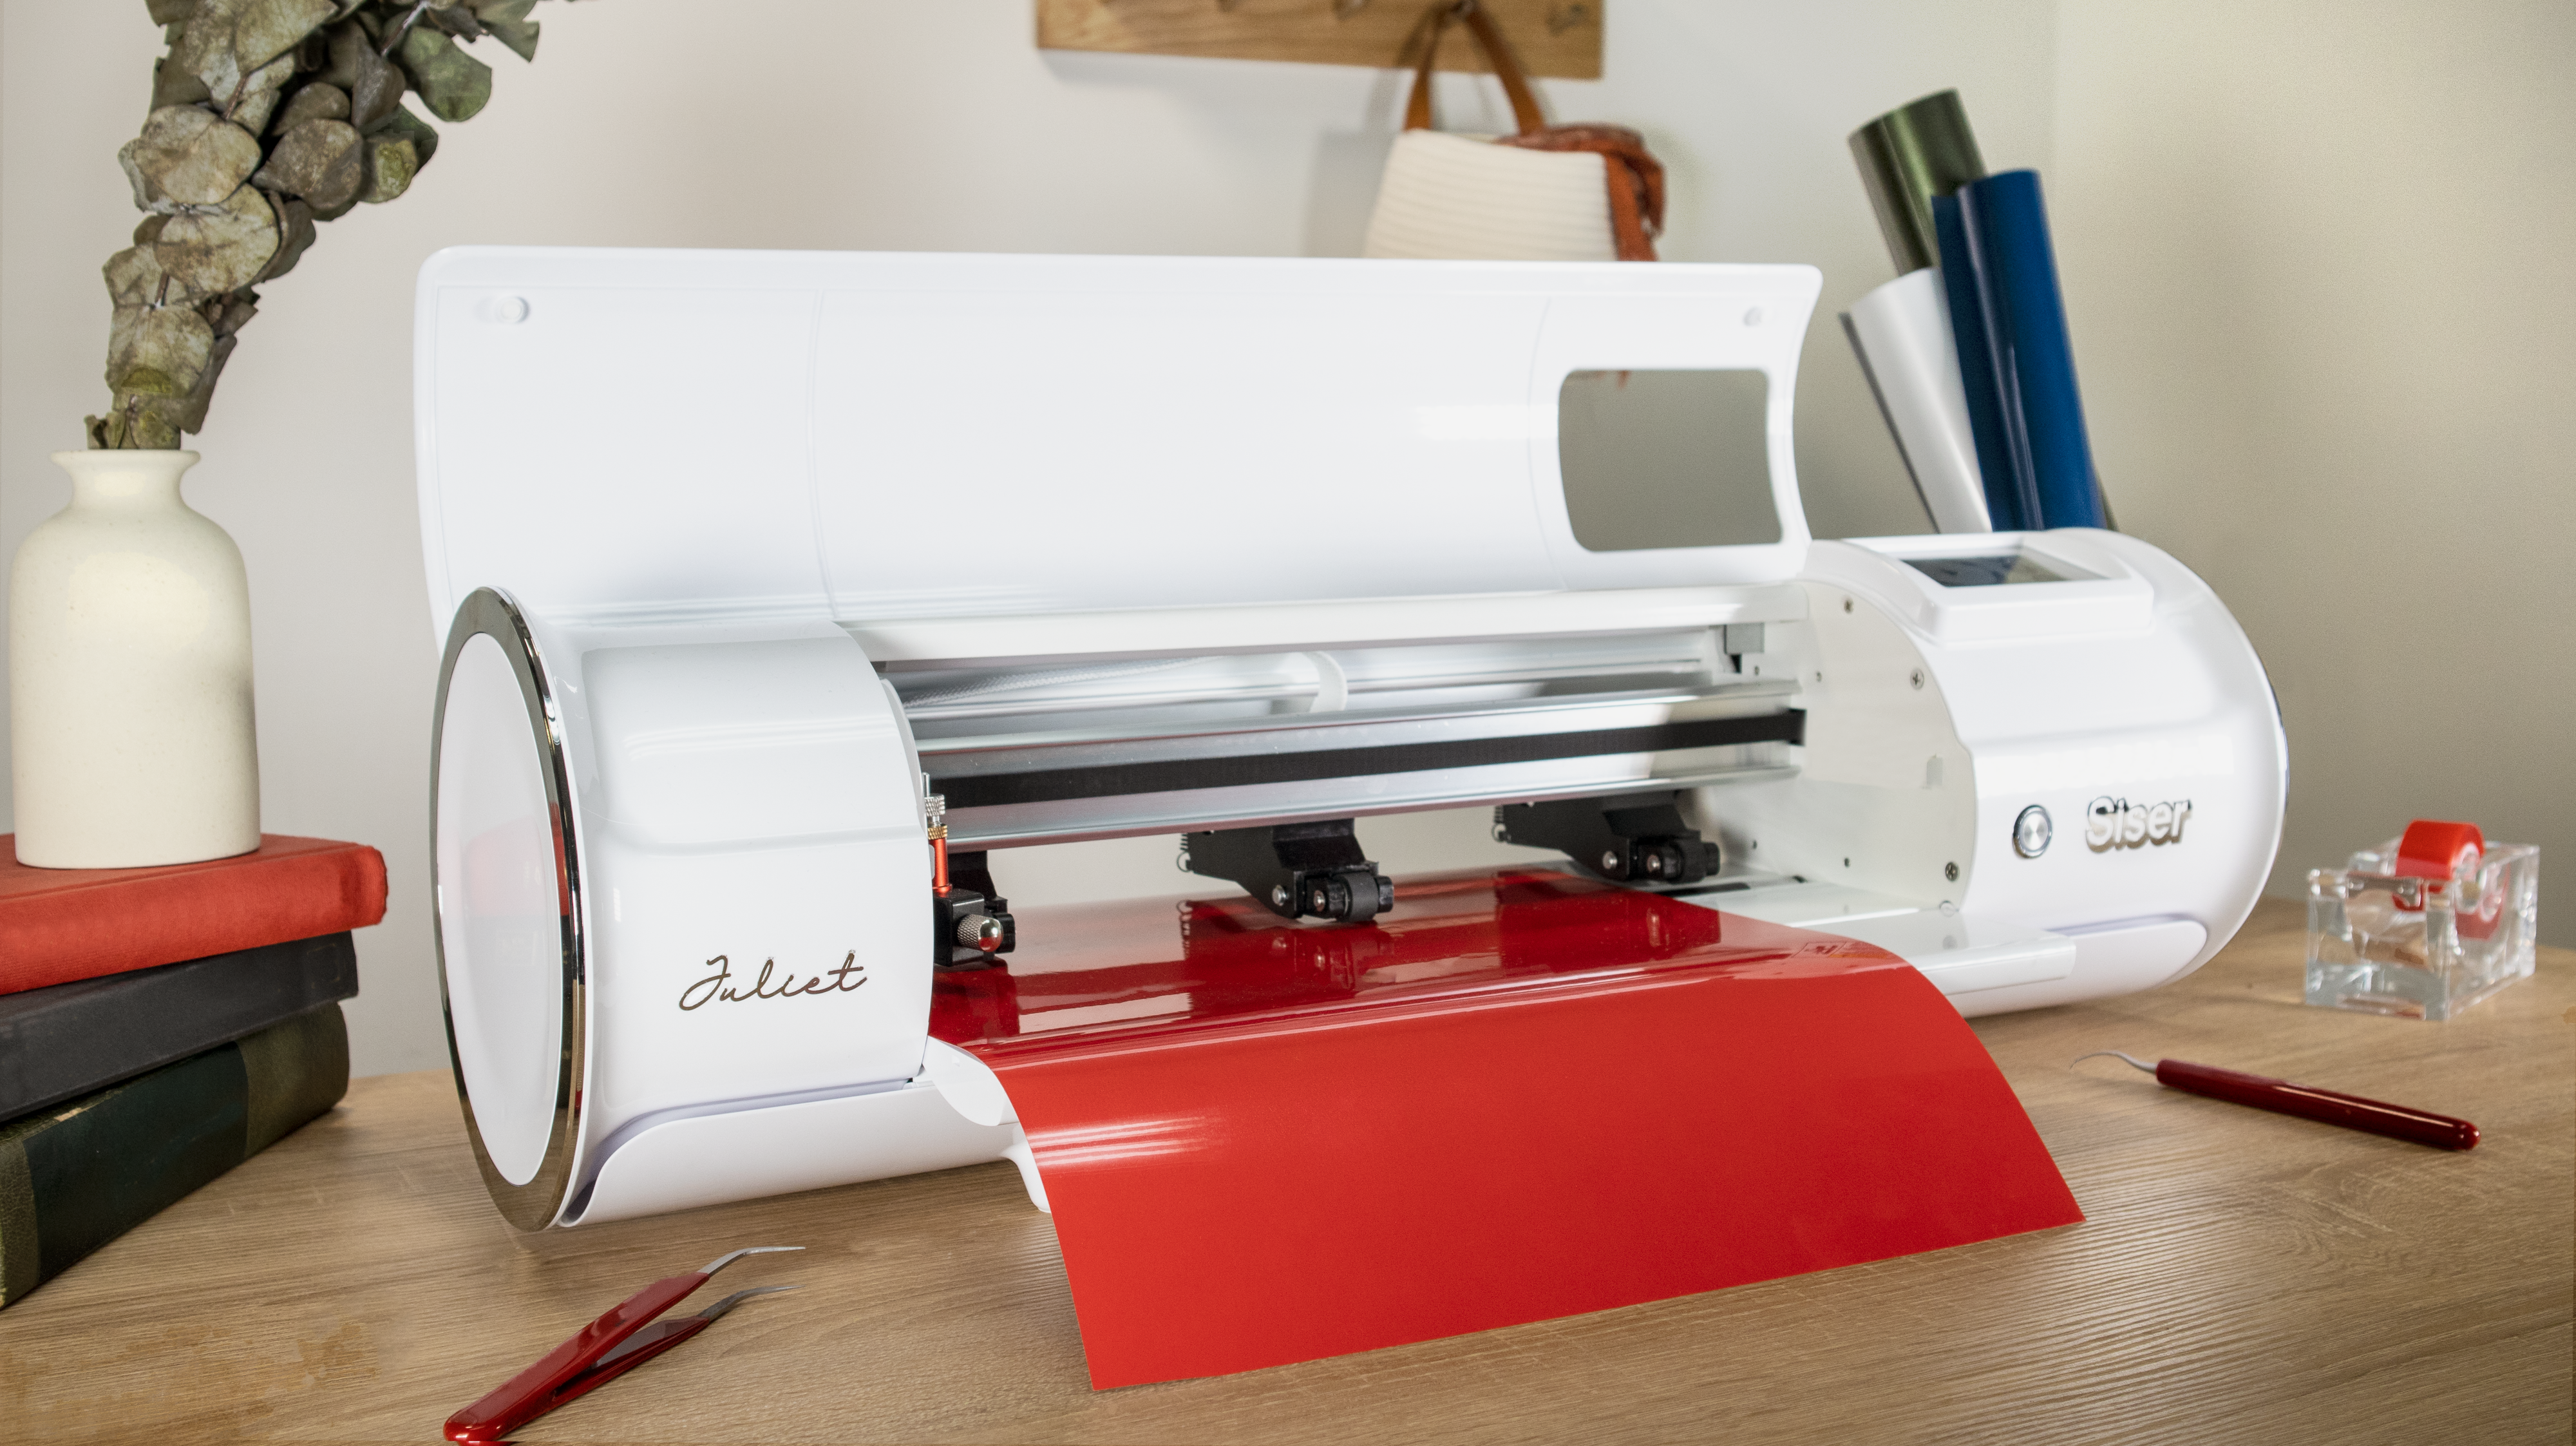 image of the Siser Juliet 12" Vinyl Craft Cutting Machine with red vinyl on a desk